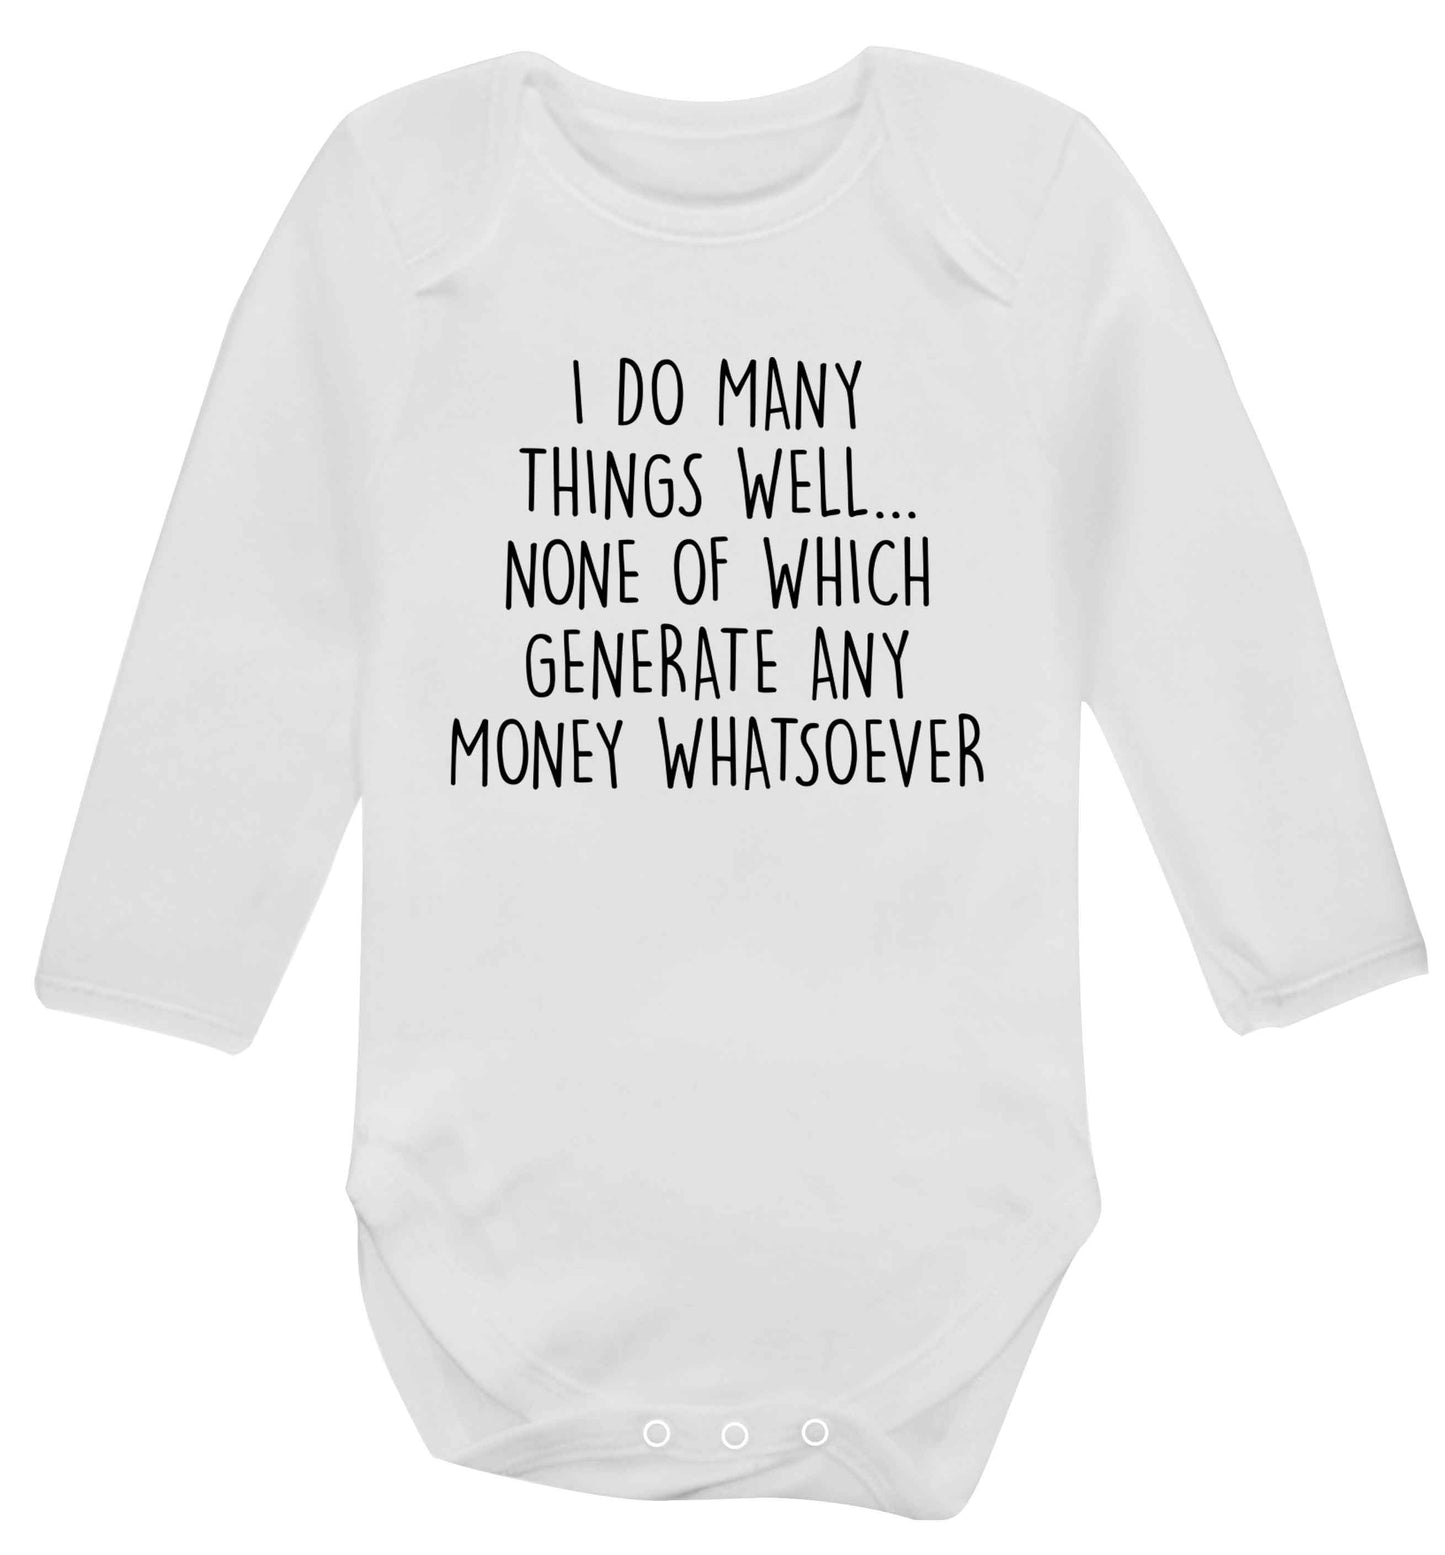 I do many things well none of which generate income Baby Vest long sleeved white 6-12 months